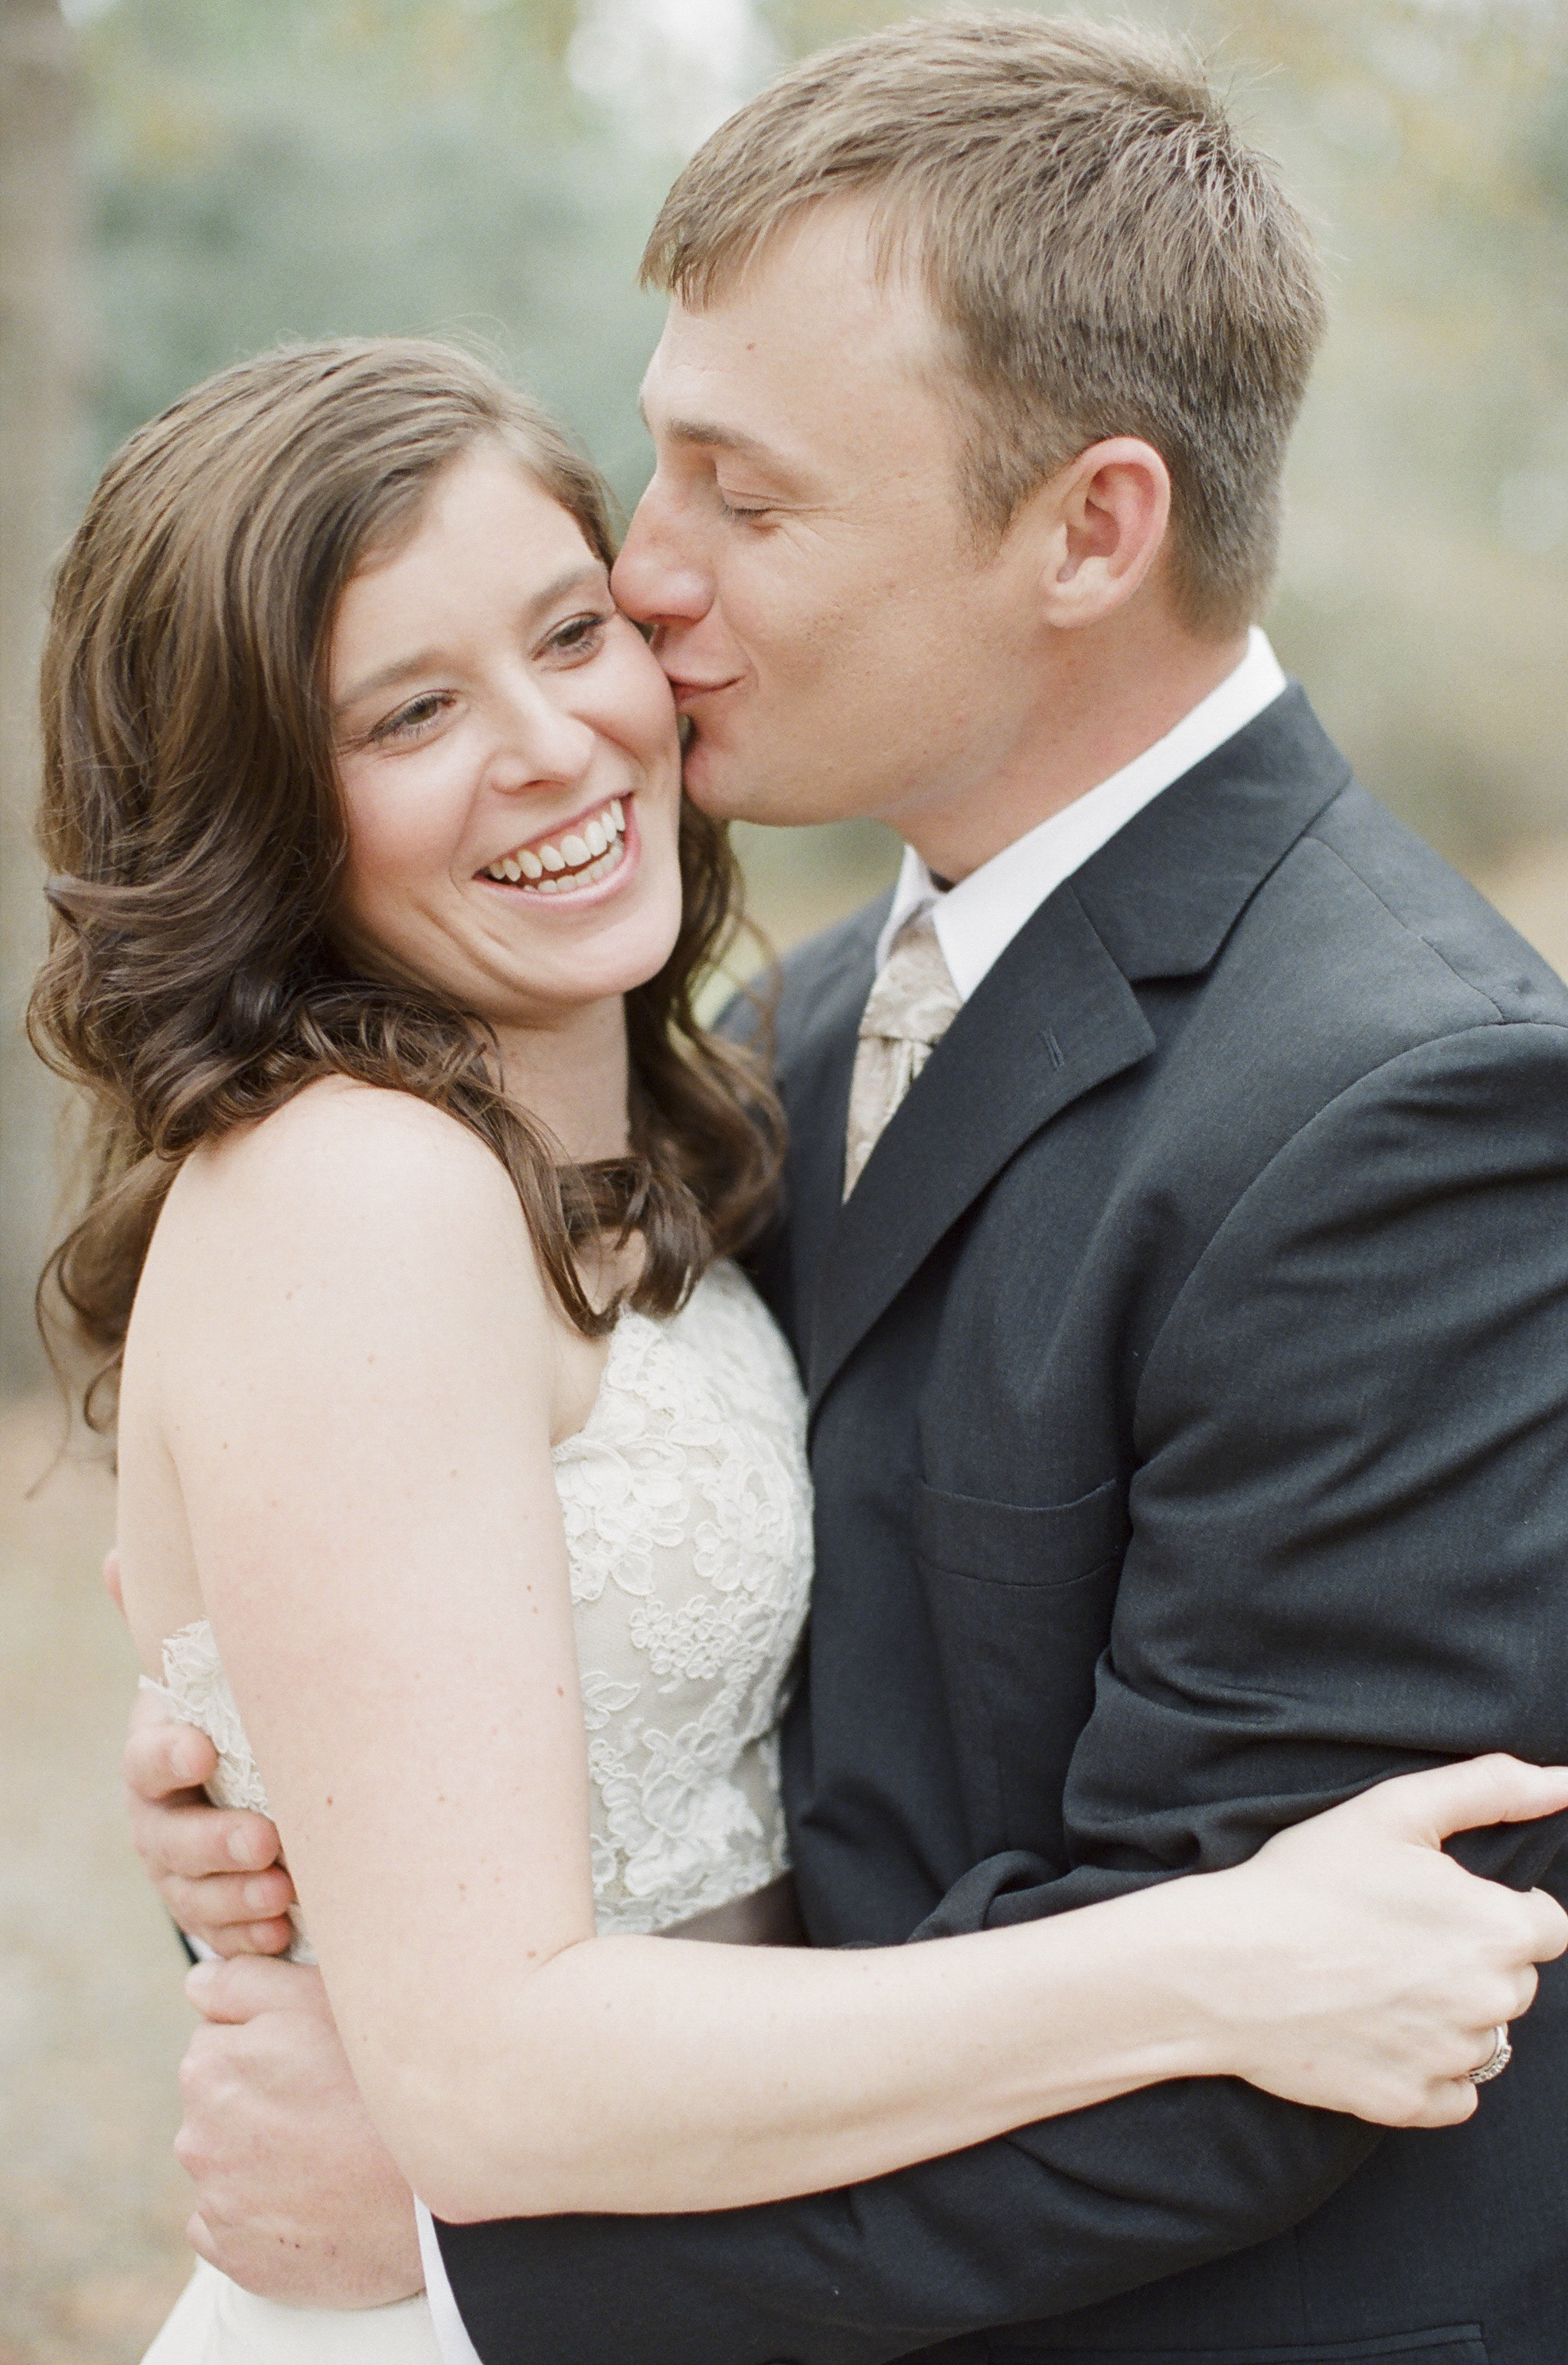 Groom Kissing Bride from Ashley Seawell Photography